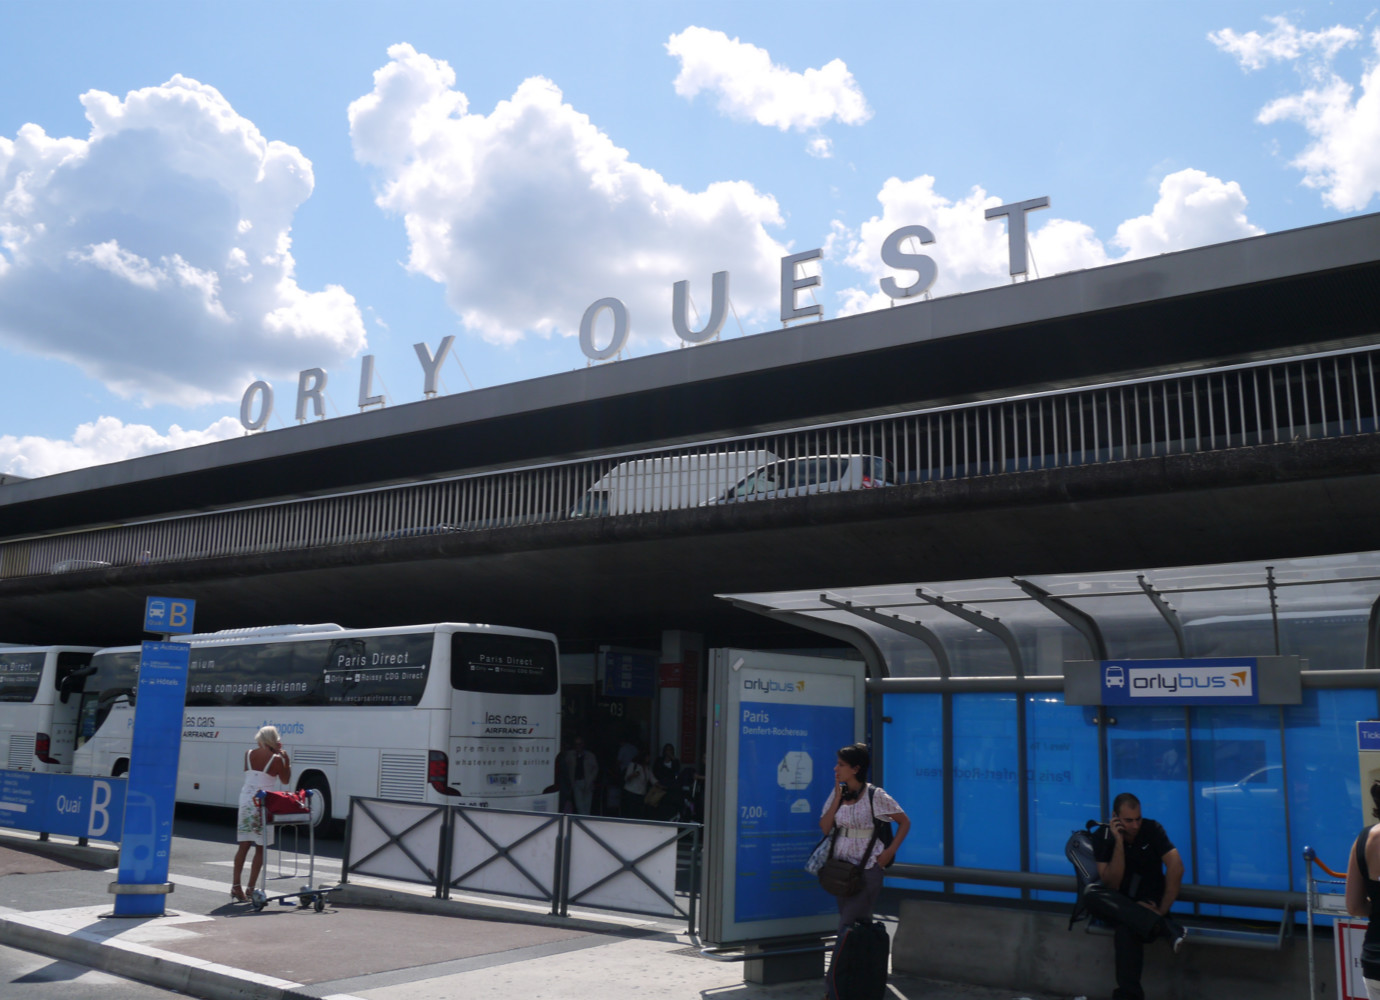 orly airport